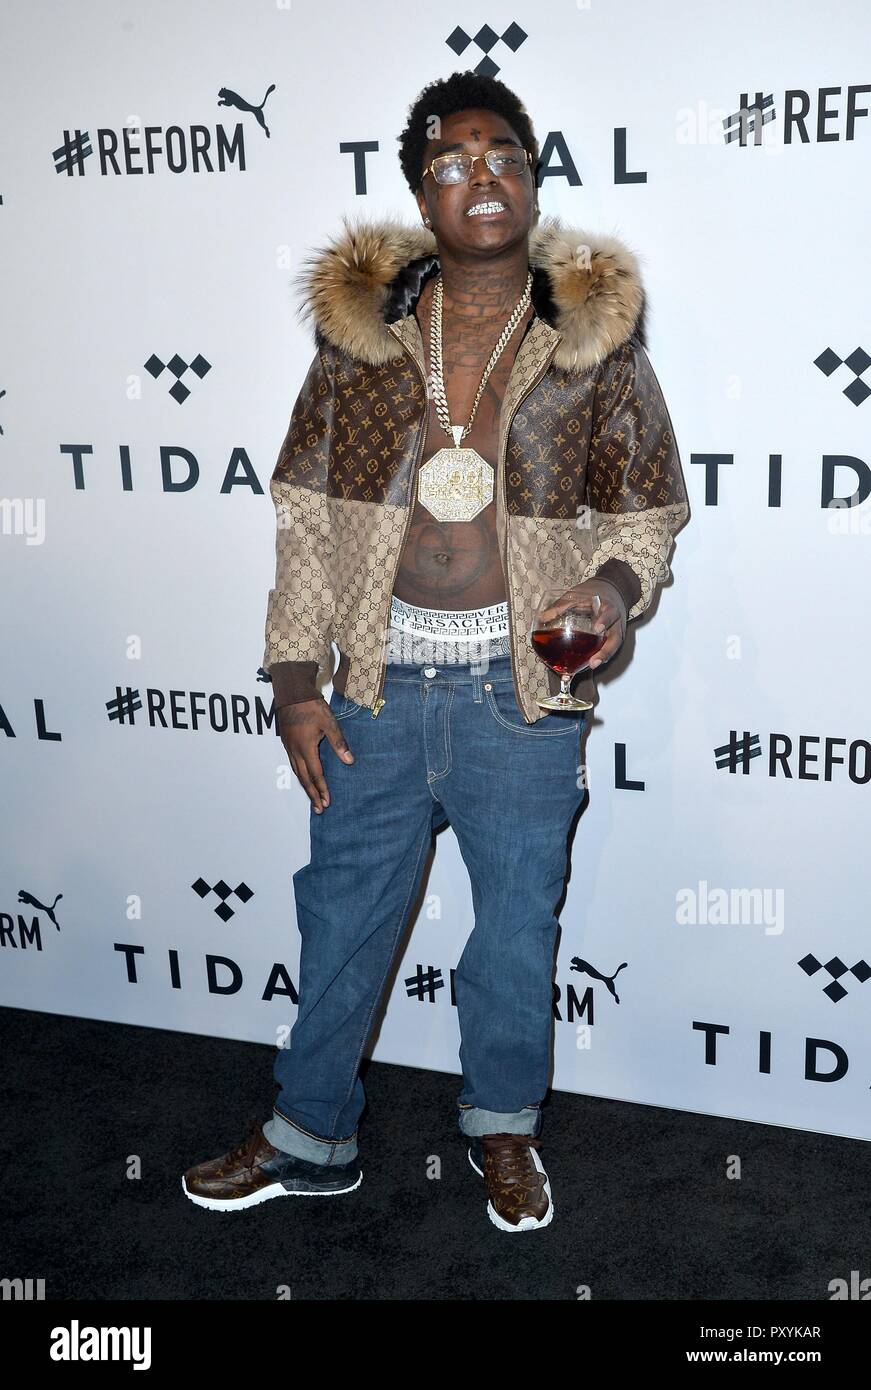 Kodak Black Outfit from July 29, 2021